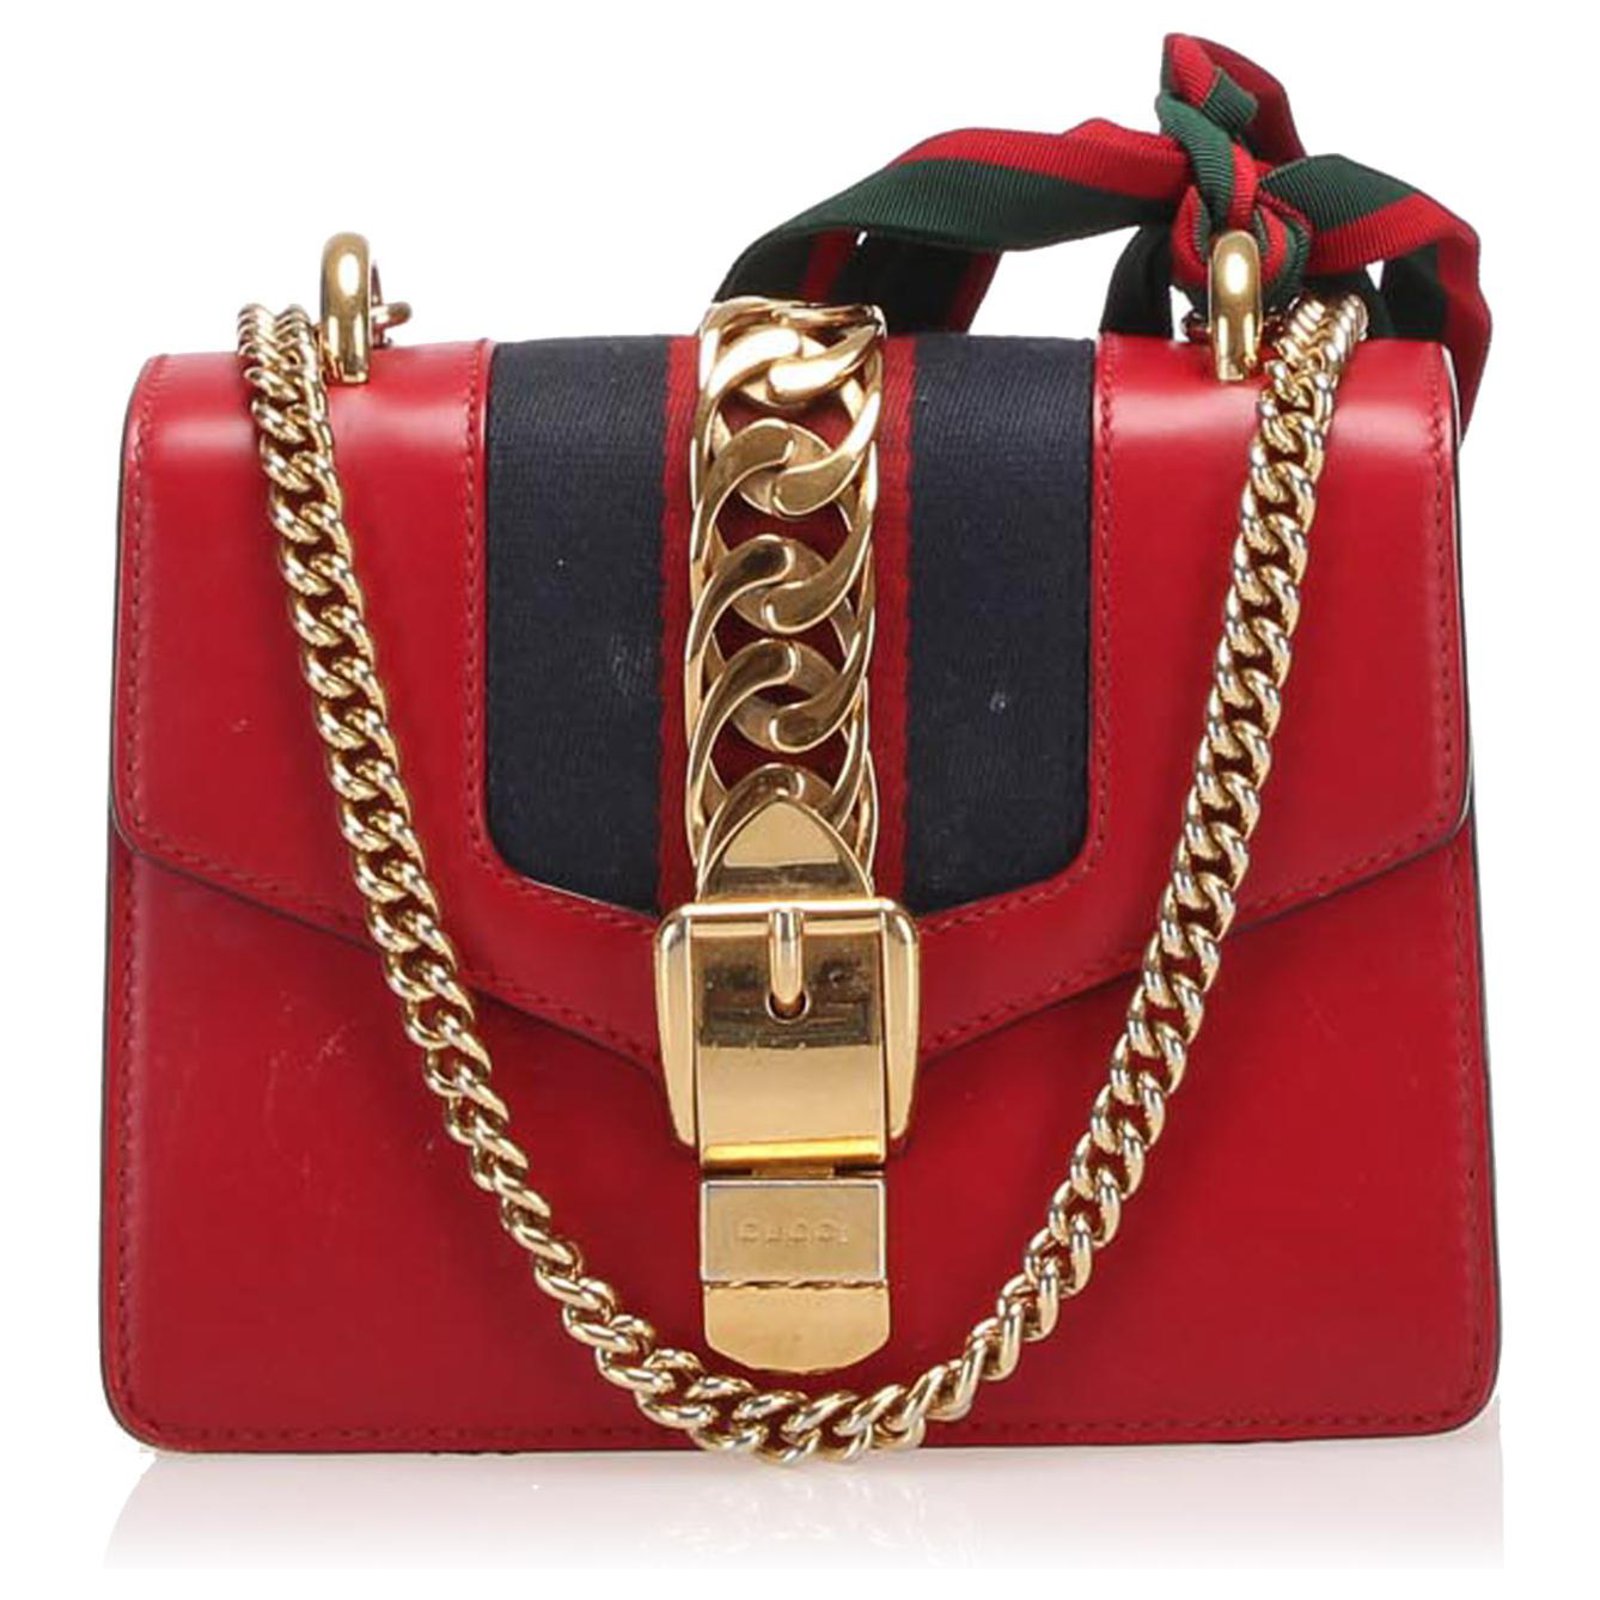 gucci sylvie leather bag